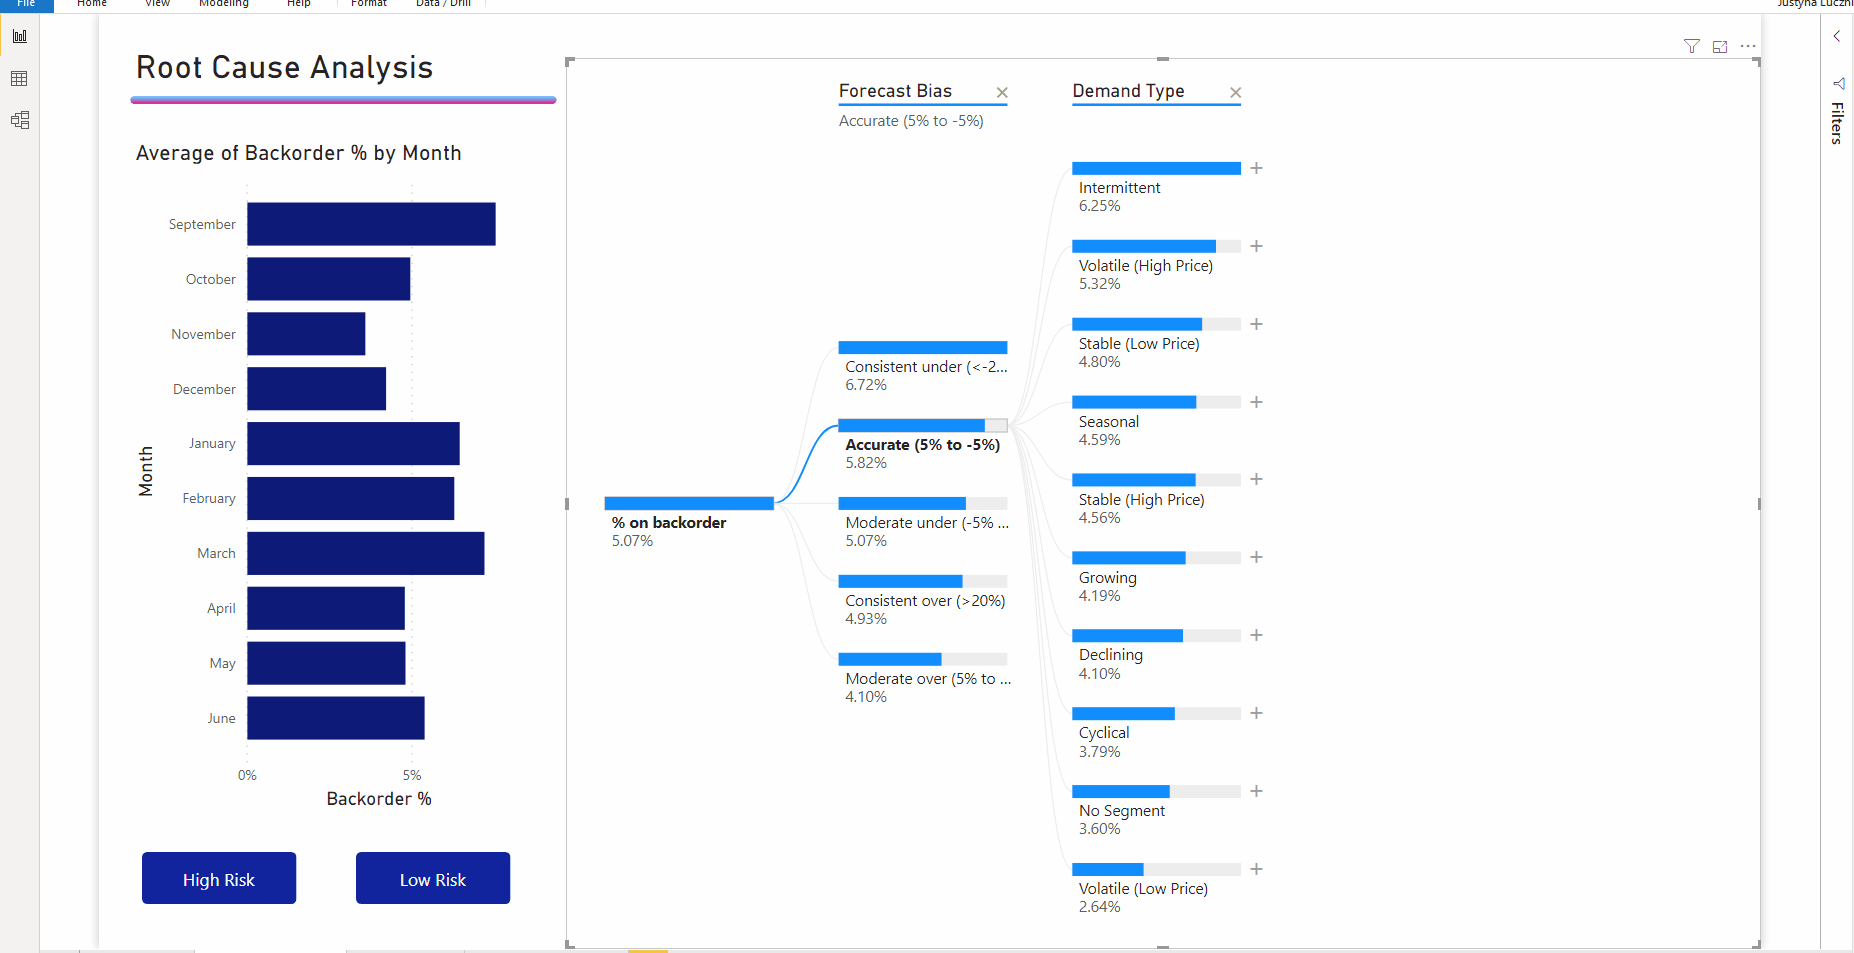 Animation shows selecting a node from an earlier level and how it changes the display to show its children nodes.